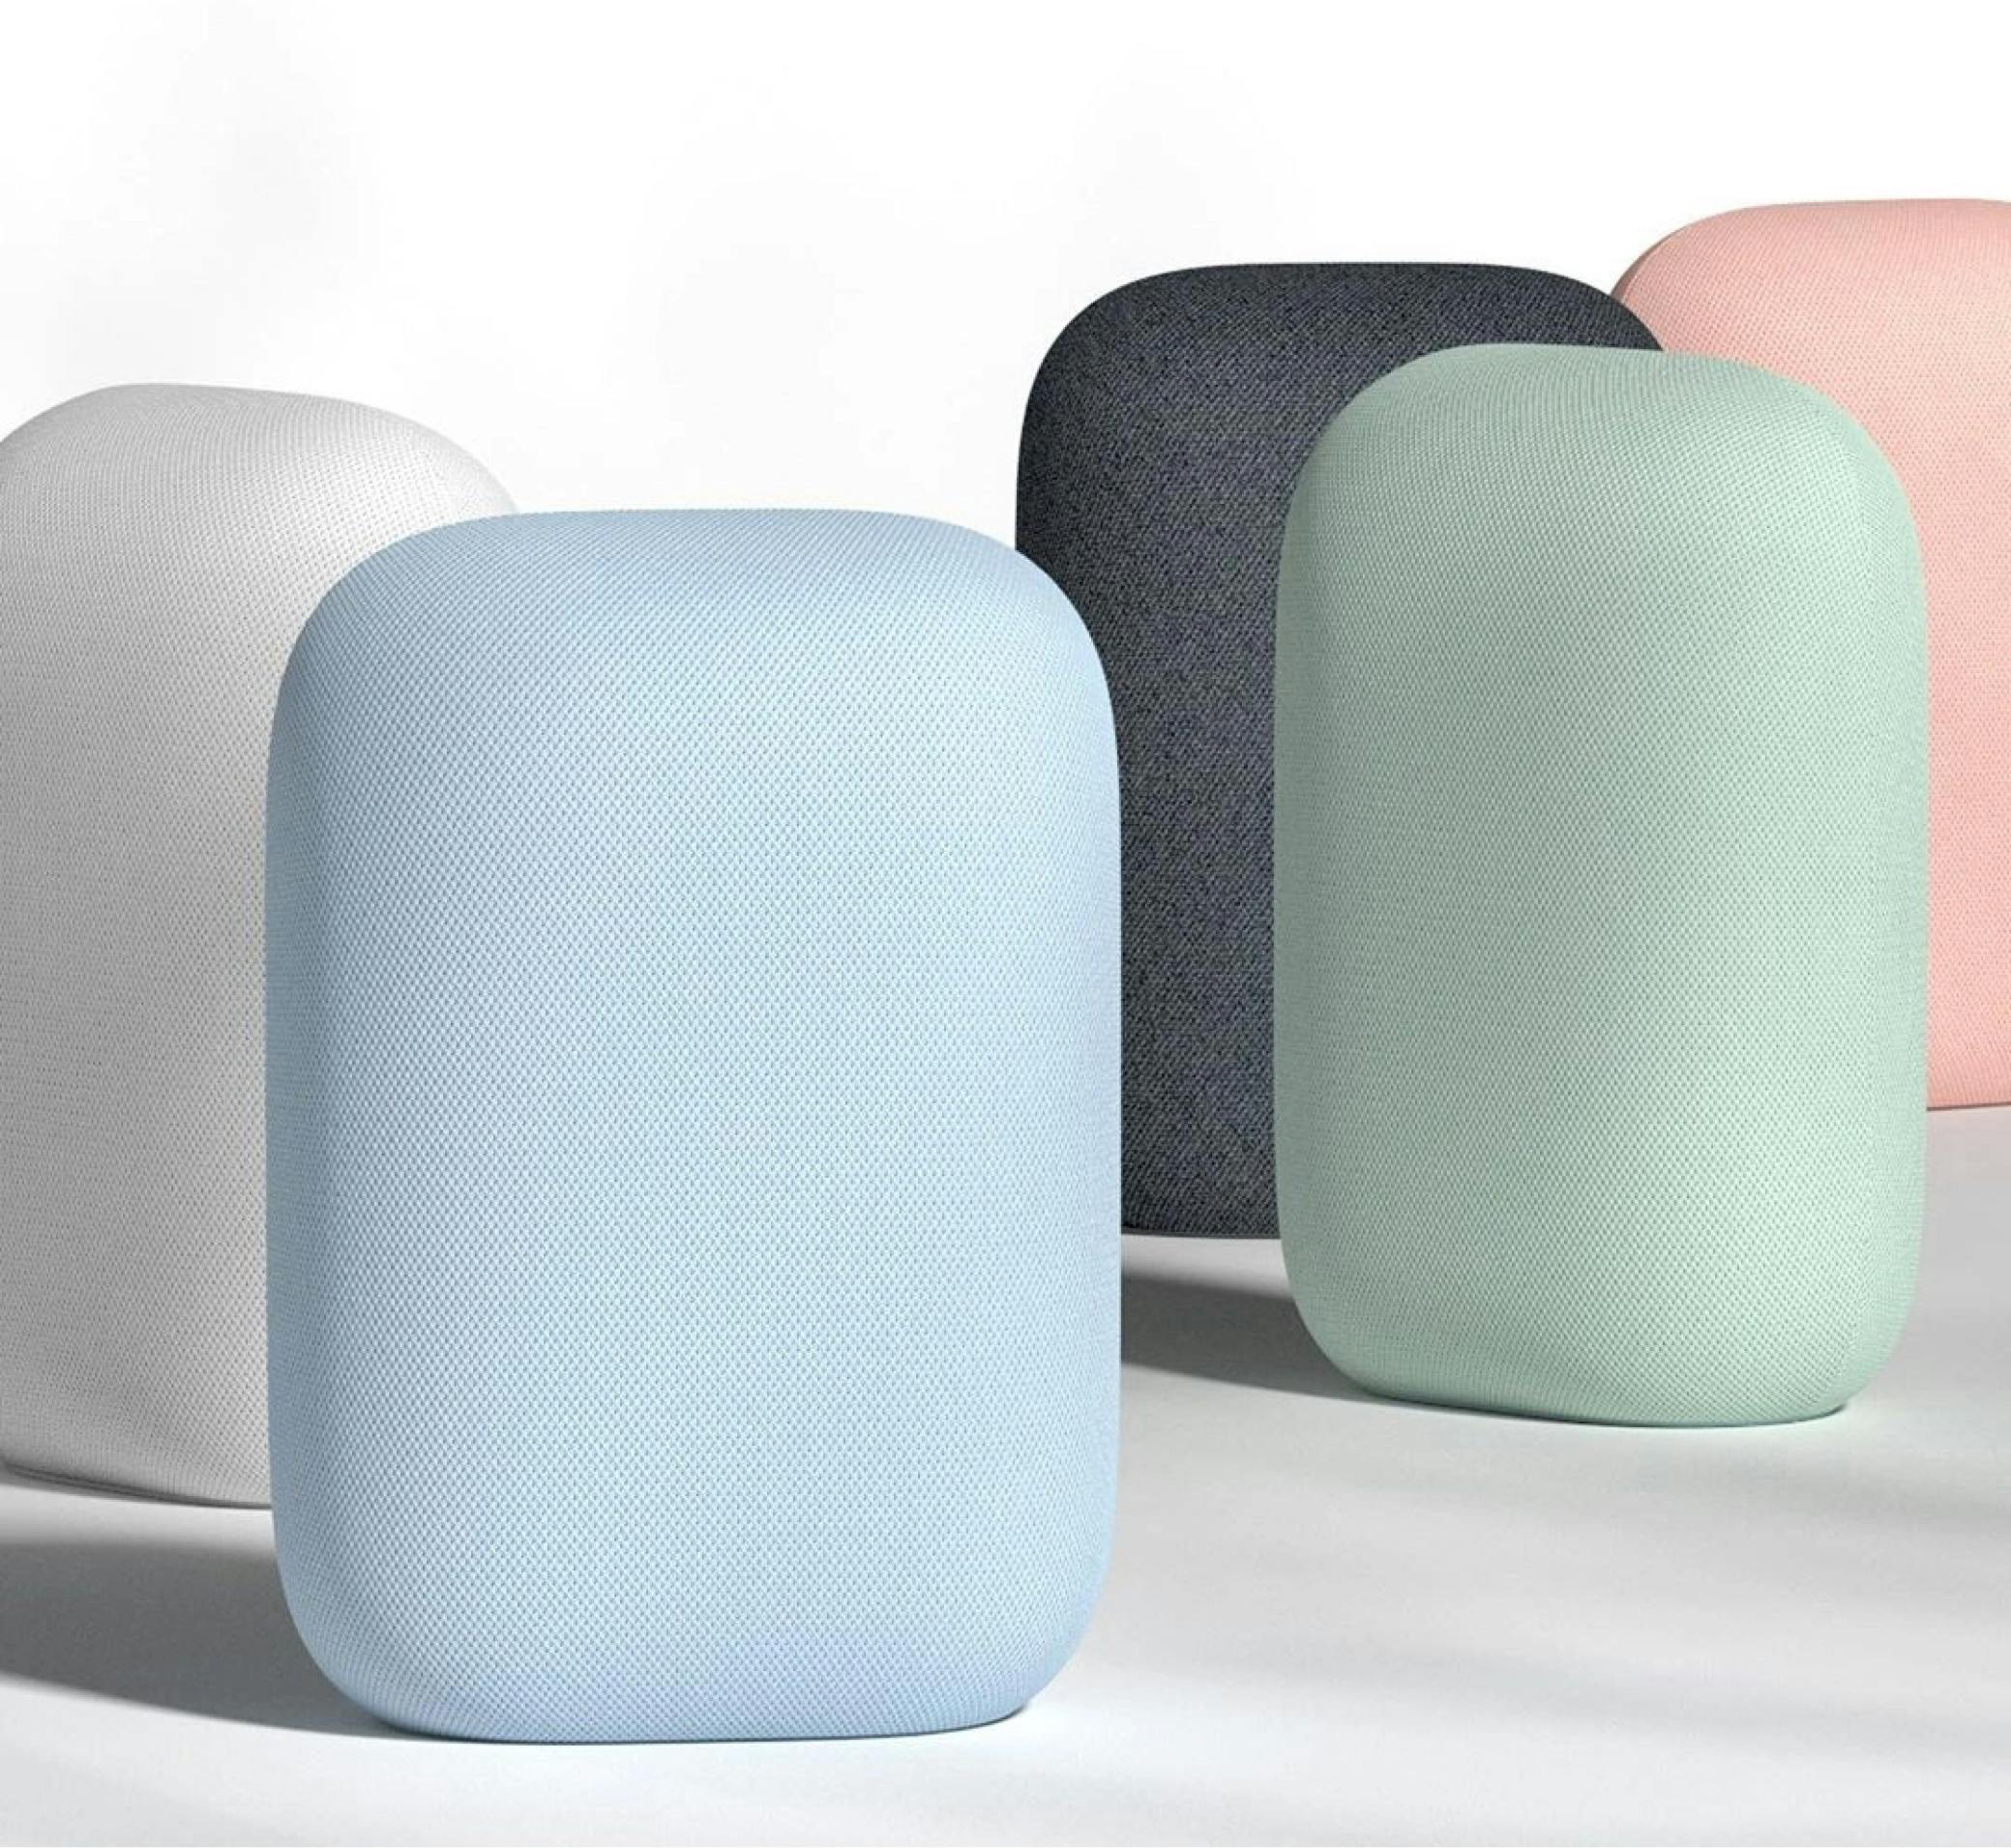 google home speakers in different pastel colors